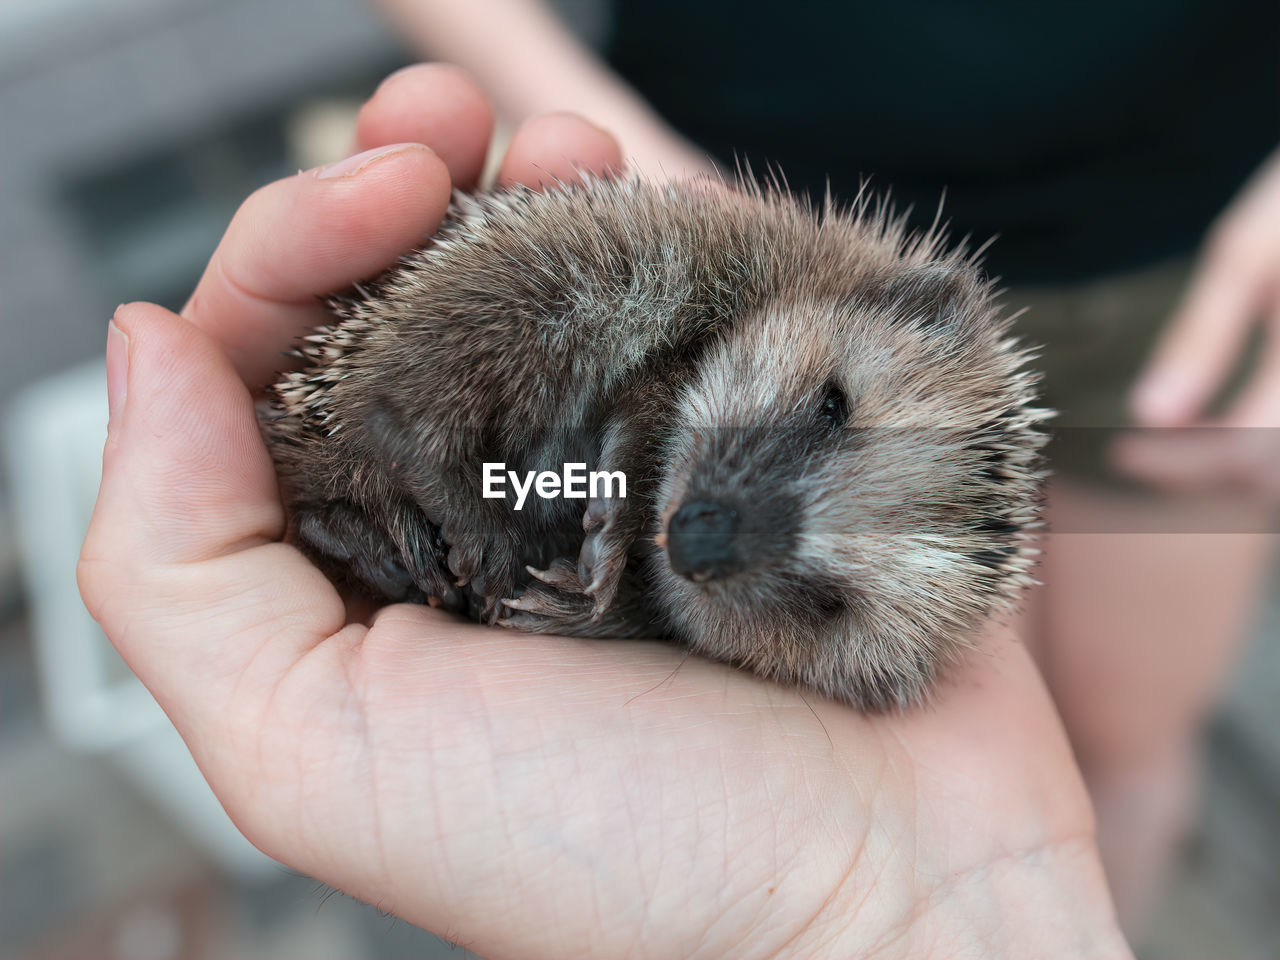 Baby hedgehog in palm of a human